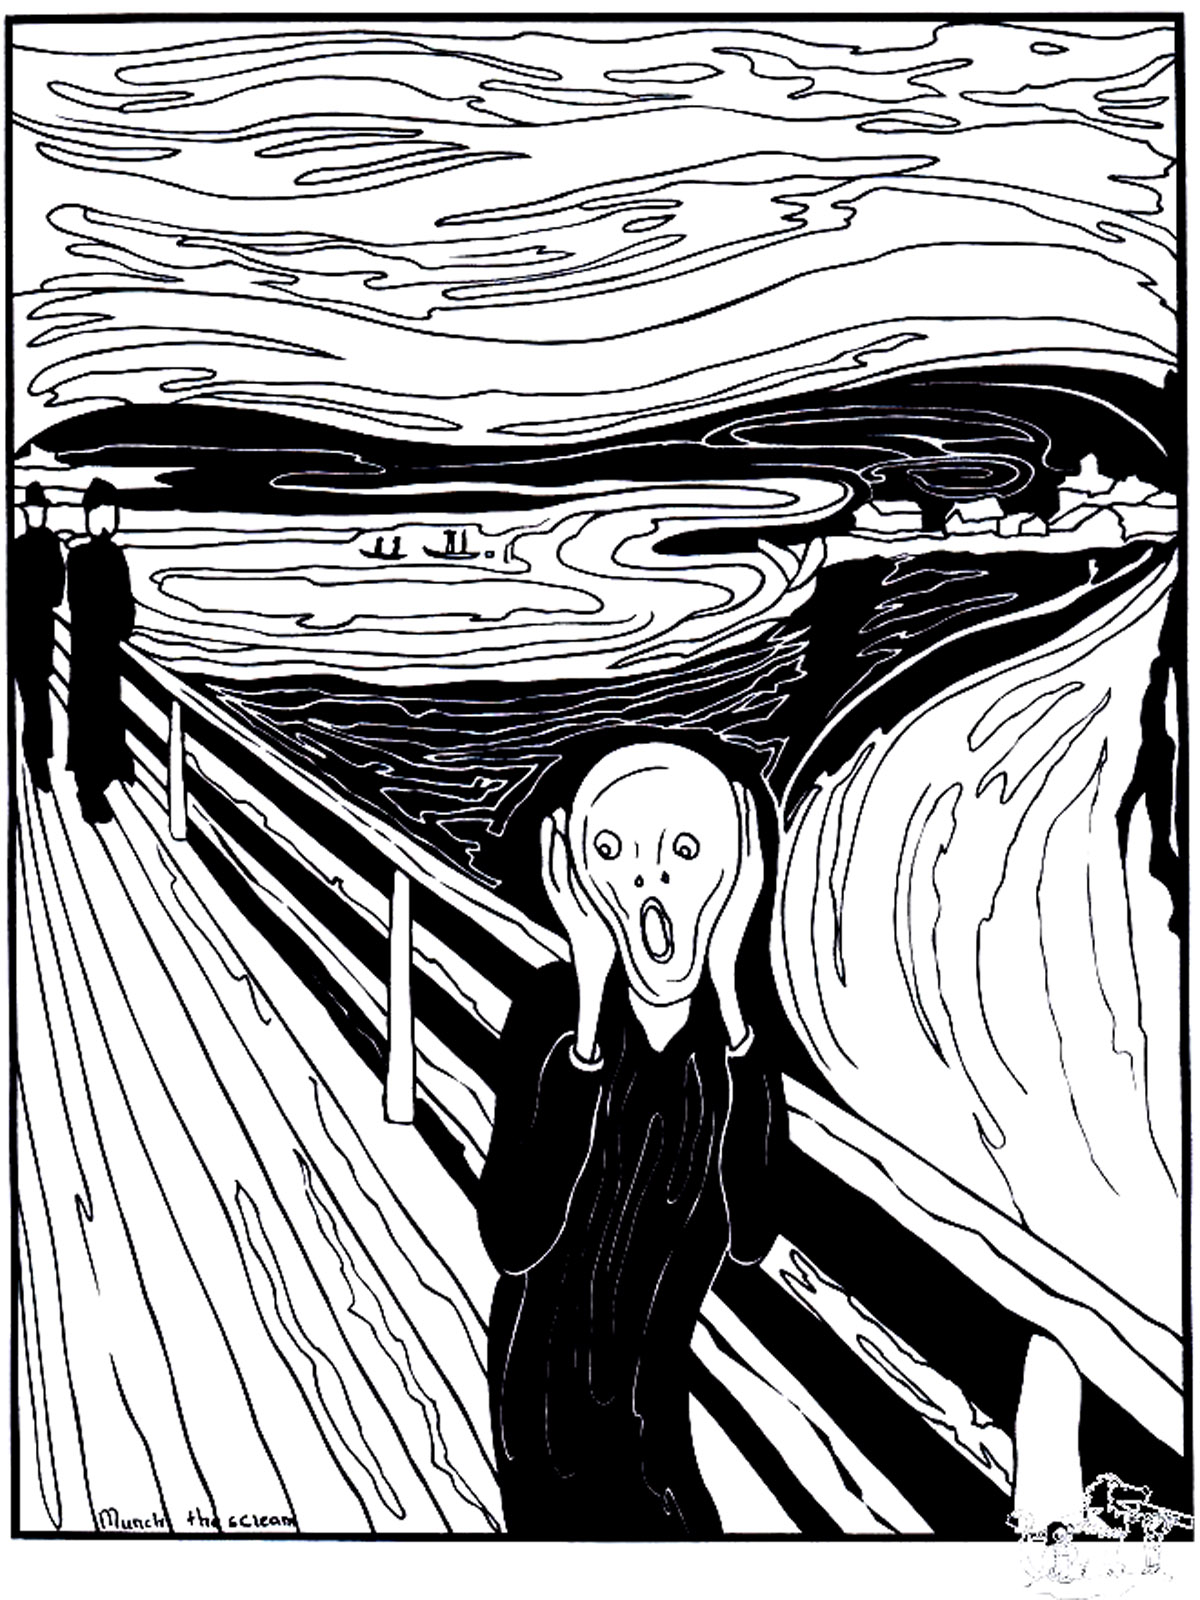 Coloring based on the painting 'The Scream' (1893) by Edvard Munch'. The Scream' is an emblematic painting that represents the sense of oppression and anguish that can sometimes overwhelm us.This coloring page is an excellent way to immerse yourself in the work of art. Just don't get too caught up in its mortifying atmosphere...